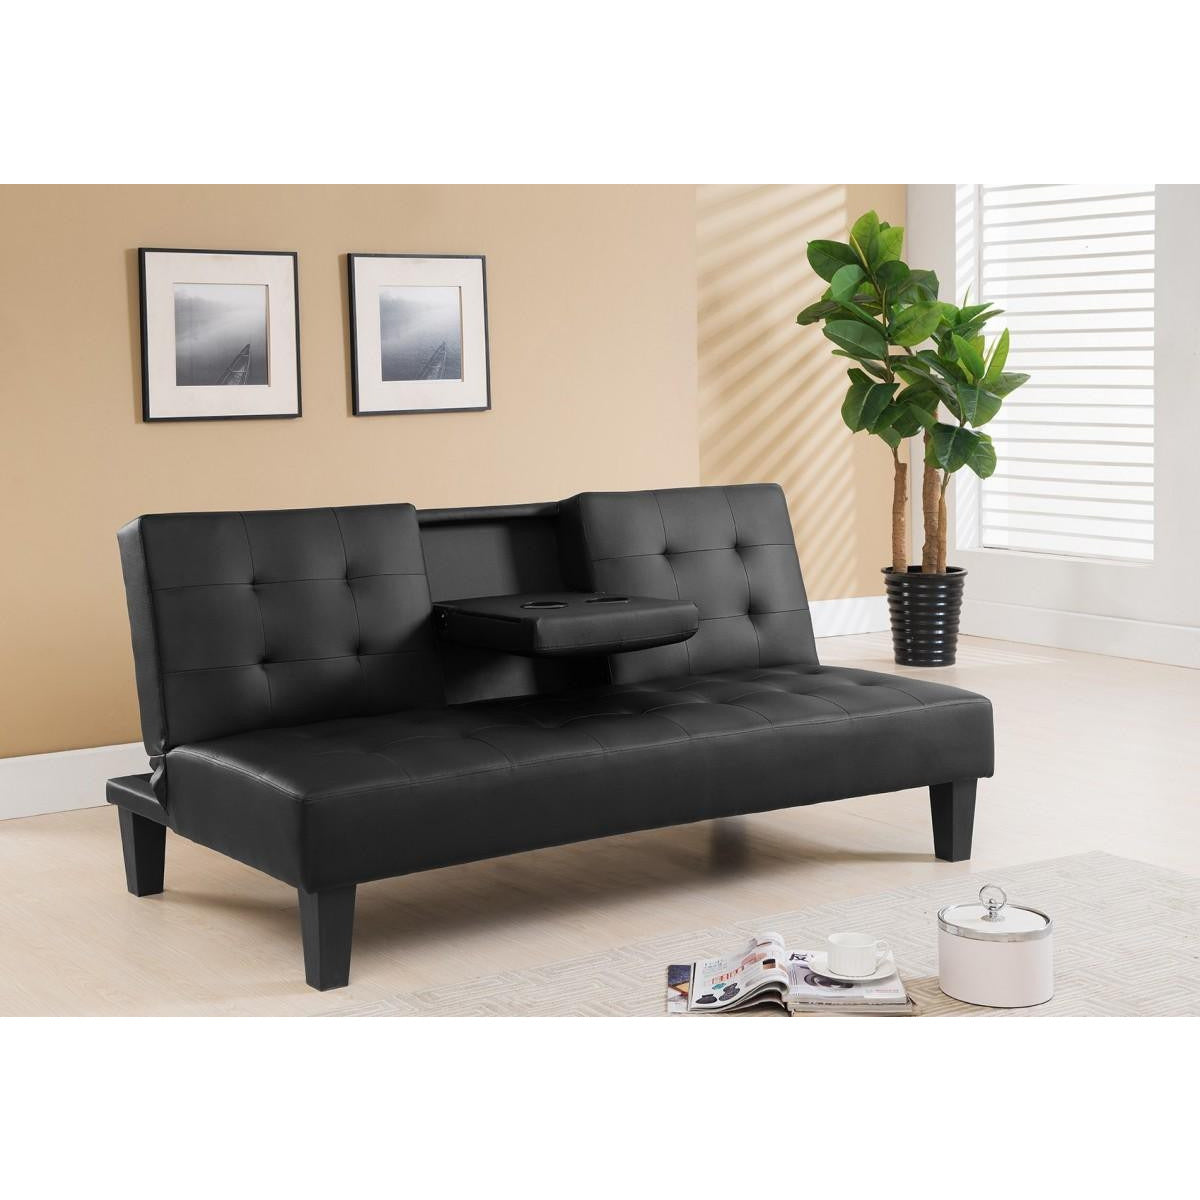 Premier Sofa Bed with Drinks Tray